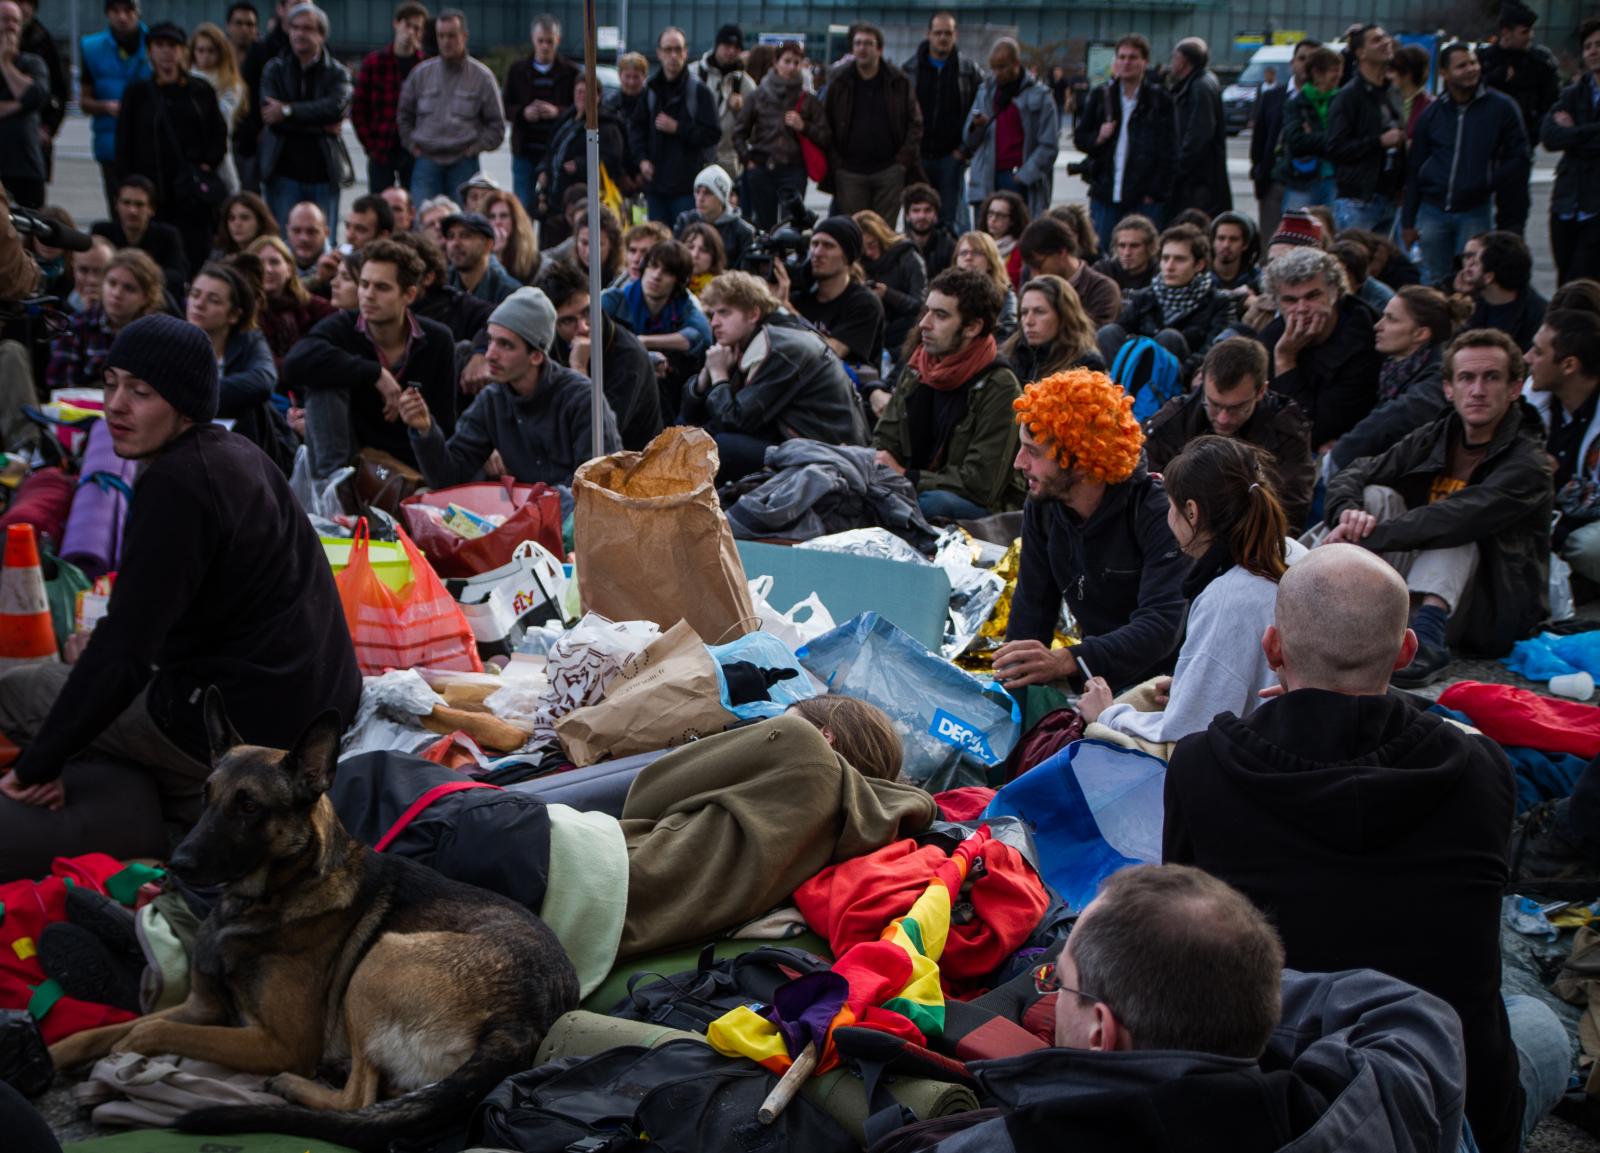 Occupy la Défense - People protesting against the financial problems in...